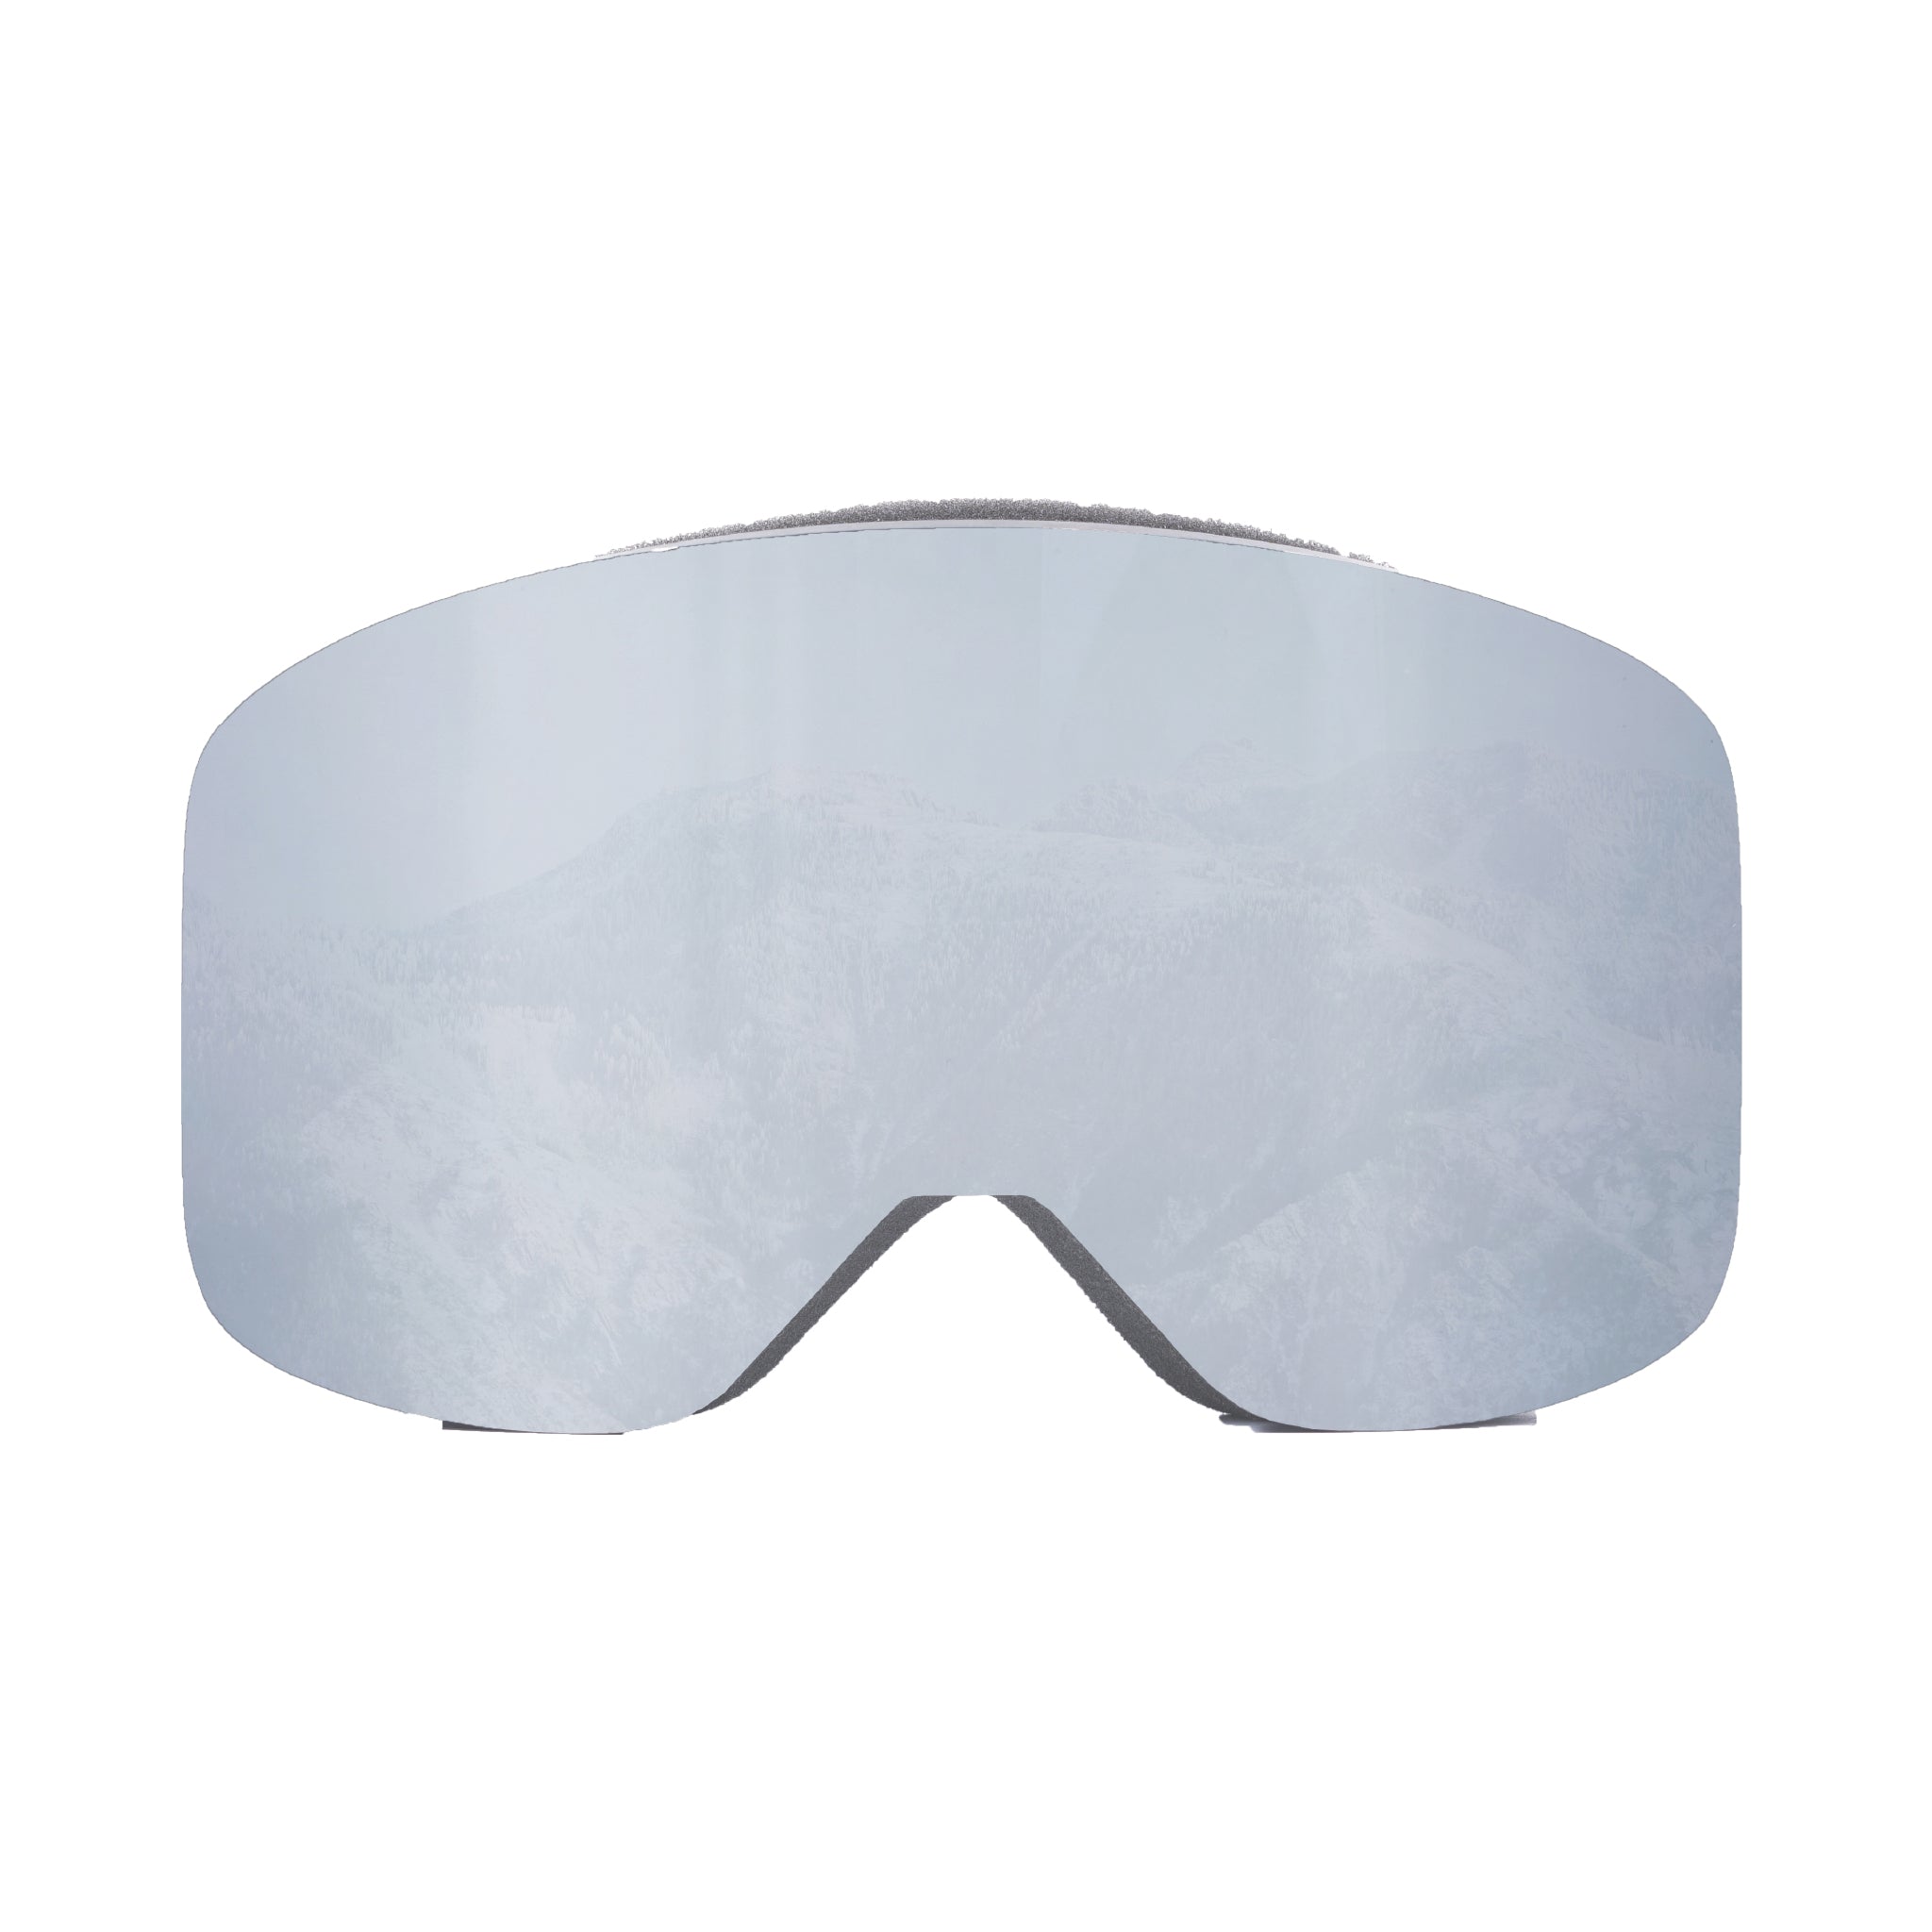 STAGE Frameless Prop Ski Goggle with Mirror Chrome Lens